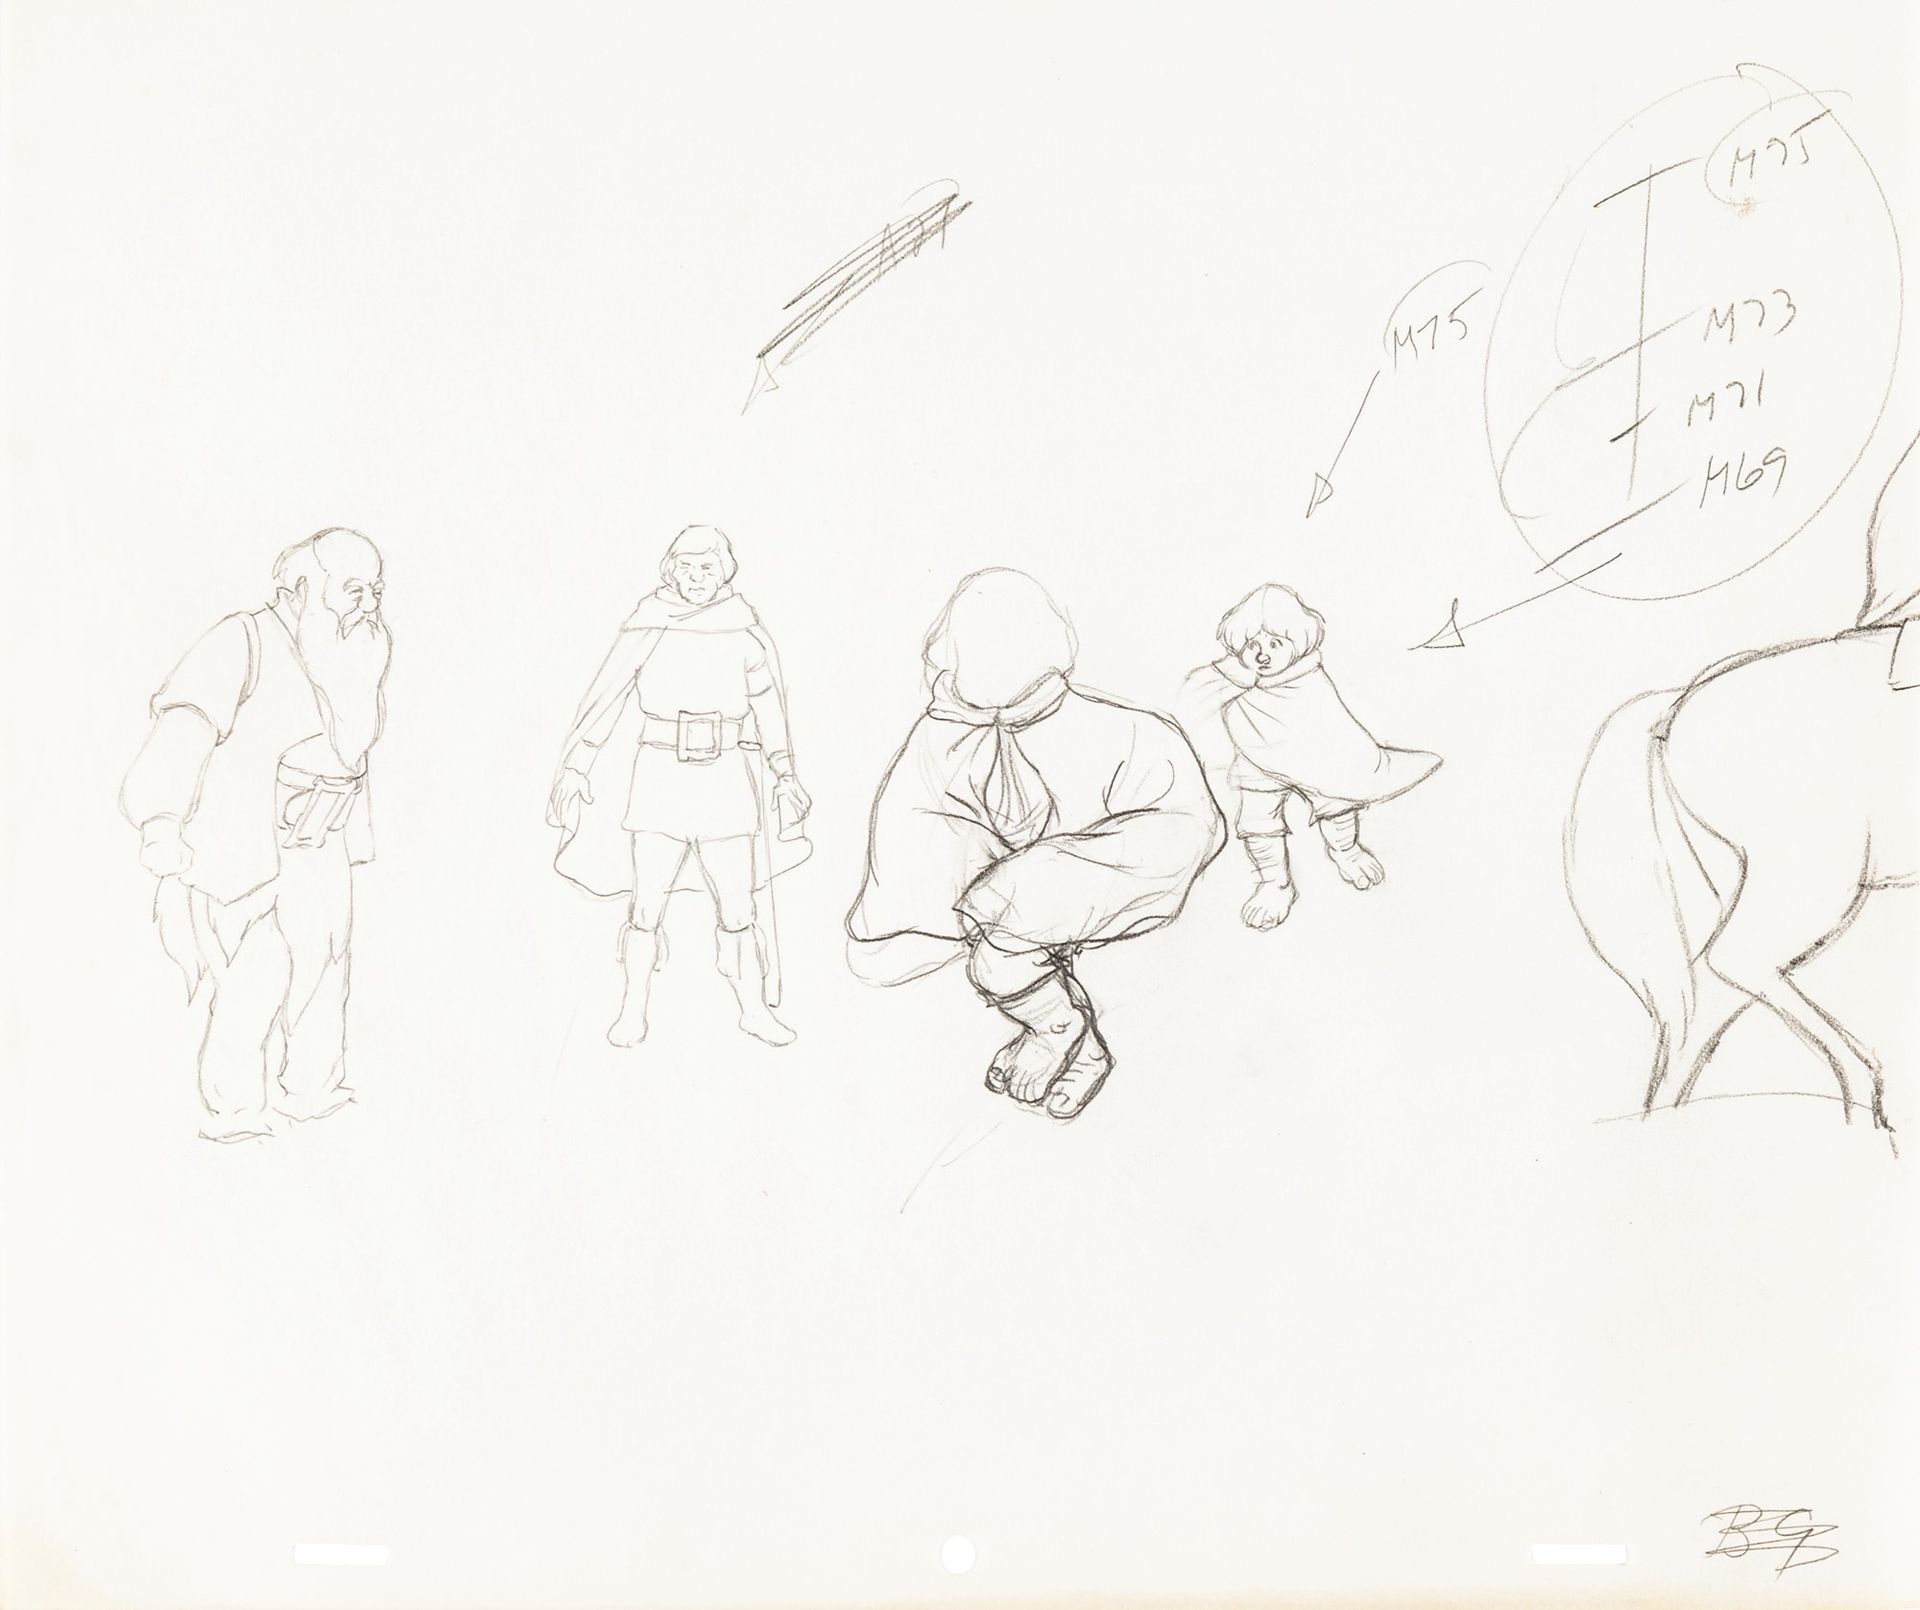 Studio Bakshi The Lord of the Rings, 1978

pencil on paper
31.5 x 27 cm
Producti&hellip;